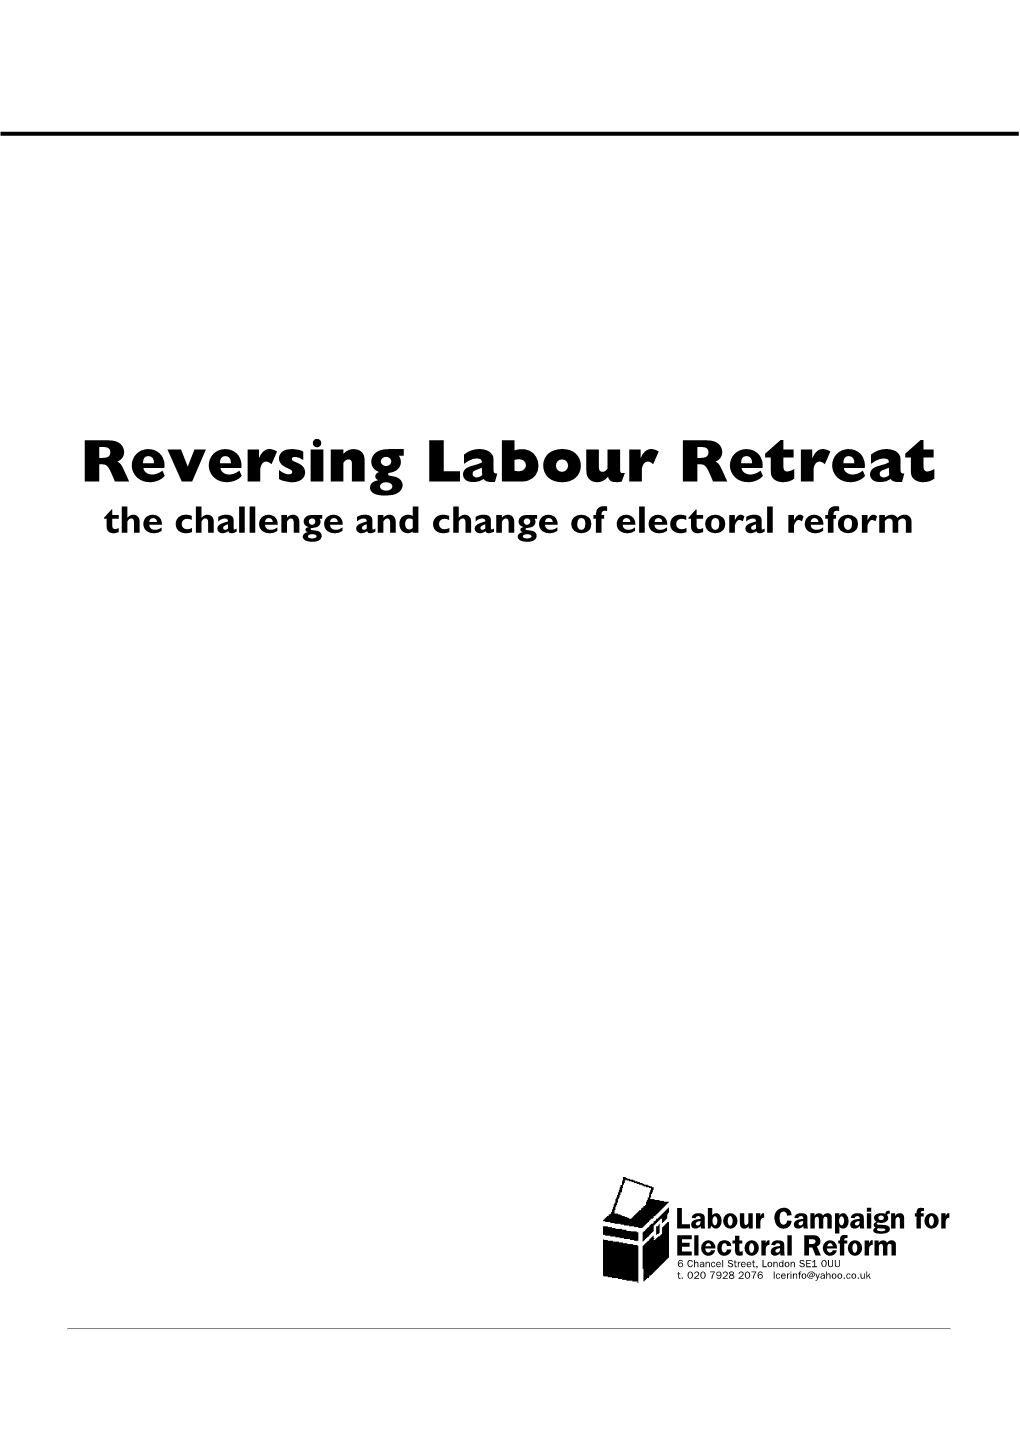 Reversing Labour Retreat the Challenge and Change of Electoral Reform